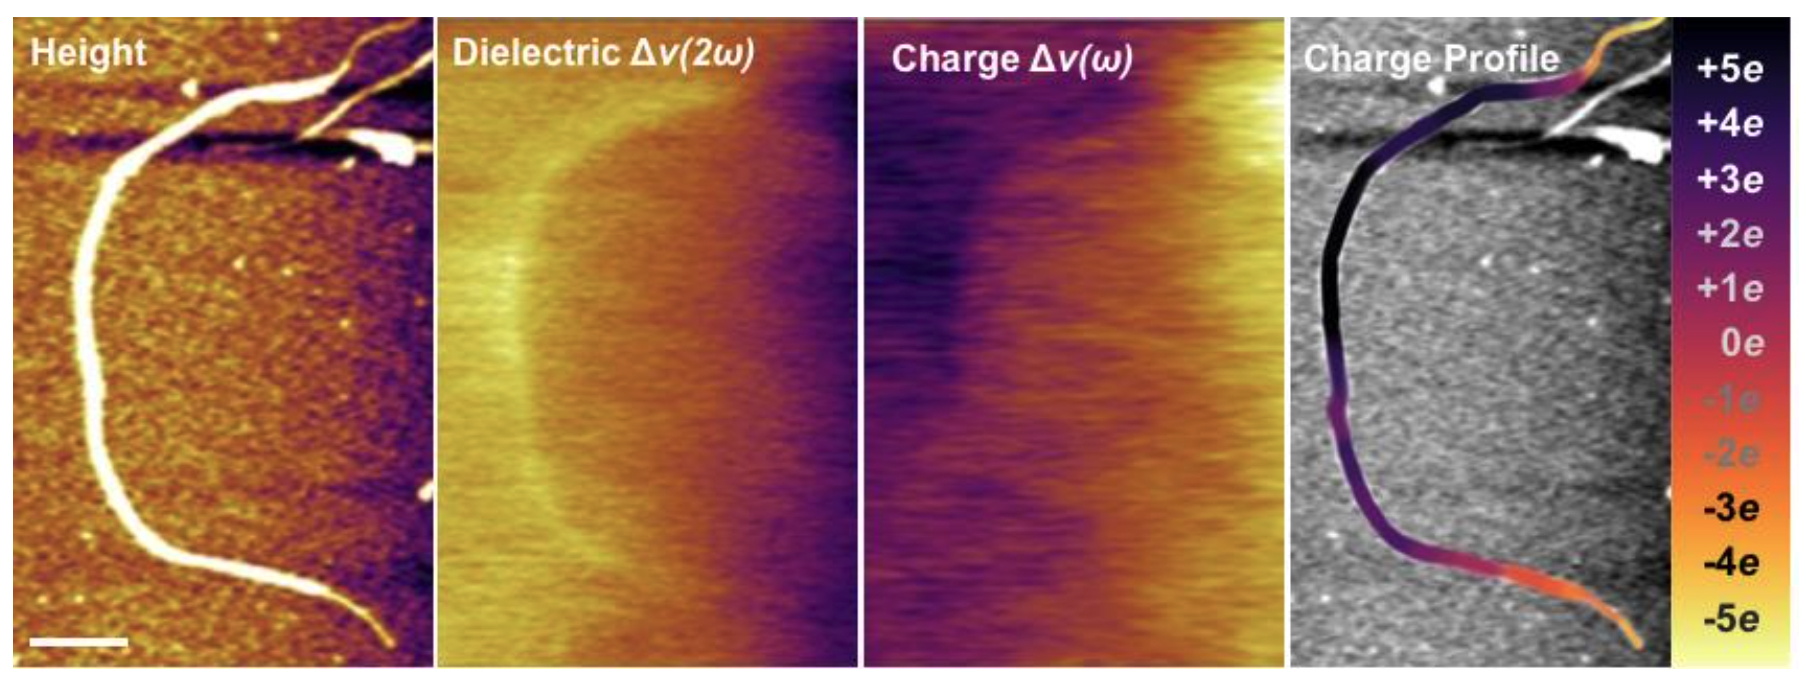 EFM images of (from left to right) topography, dielectric constant, charge and charge profile for an individual SWCNT covered in surfactant. The inset is the charge magnitude scale ranging from -5eto +5e. Dark (bright) contrast in the charge image is positive (negative) charge. Scale bar is 200 nm.